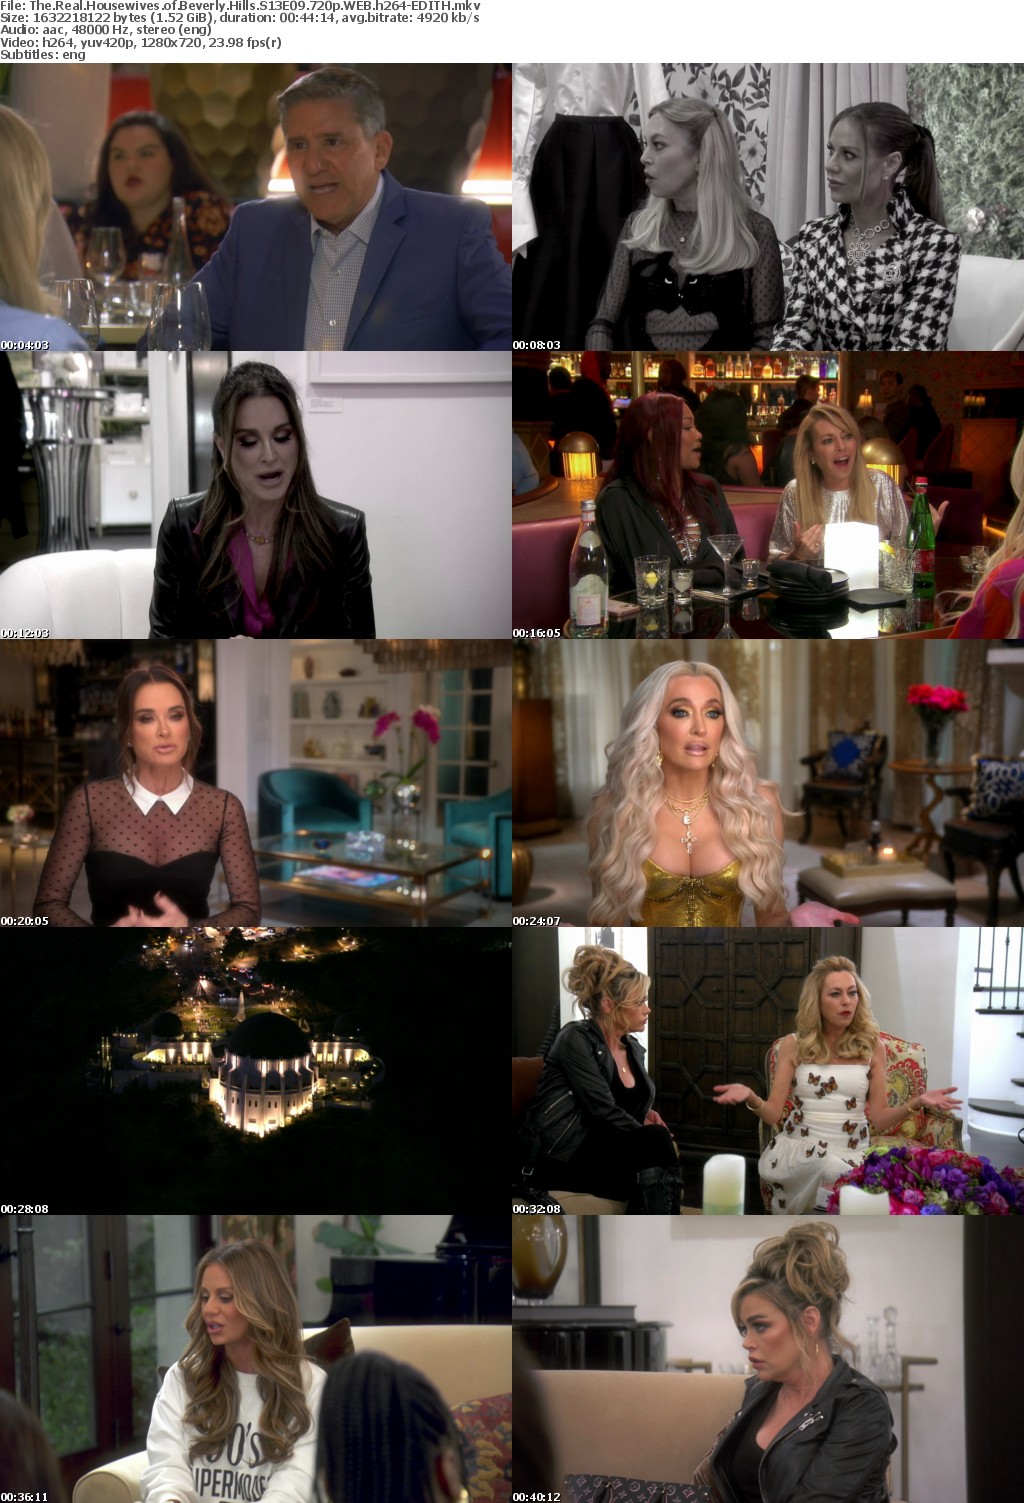 The Real Housewives of Beverly Hills S13E09 720p WEB h264-EDITH